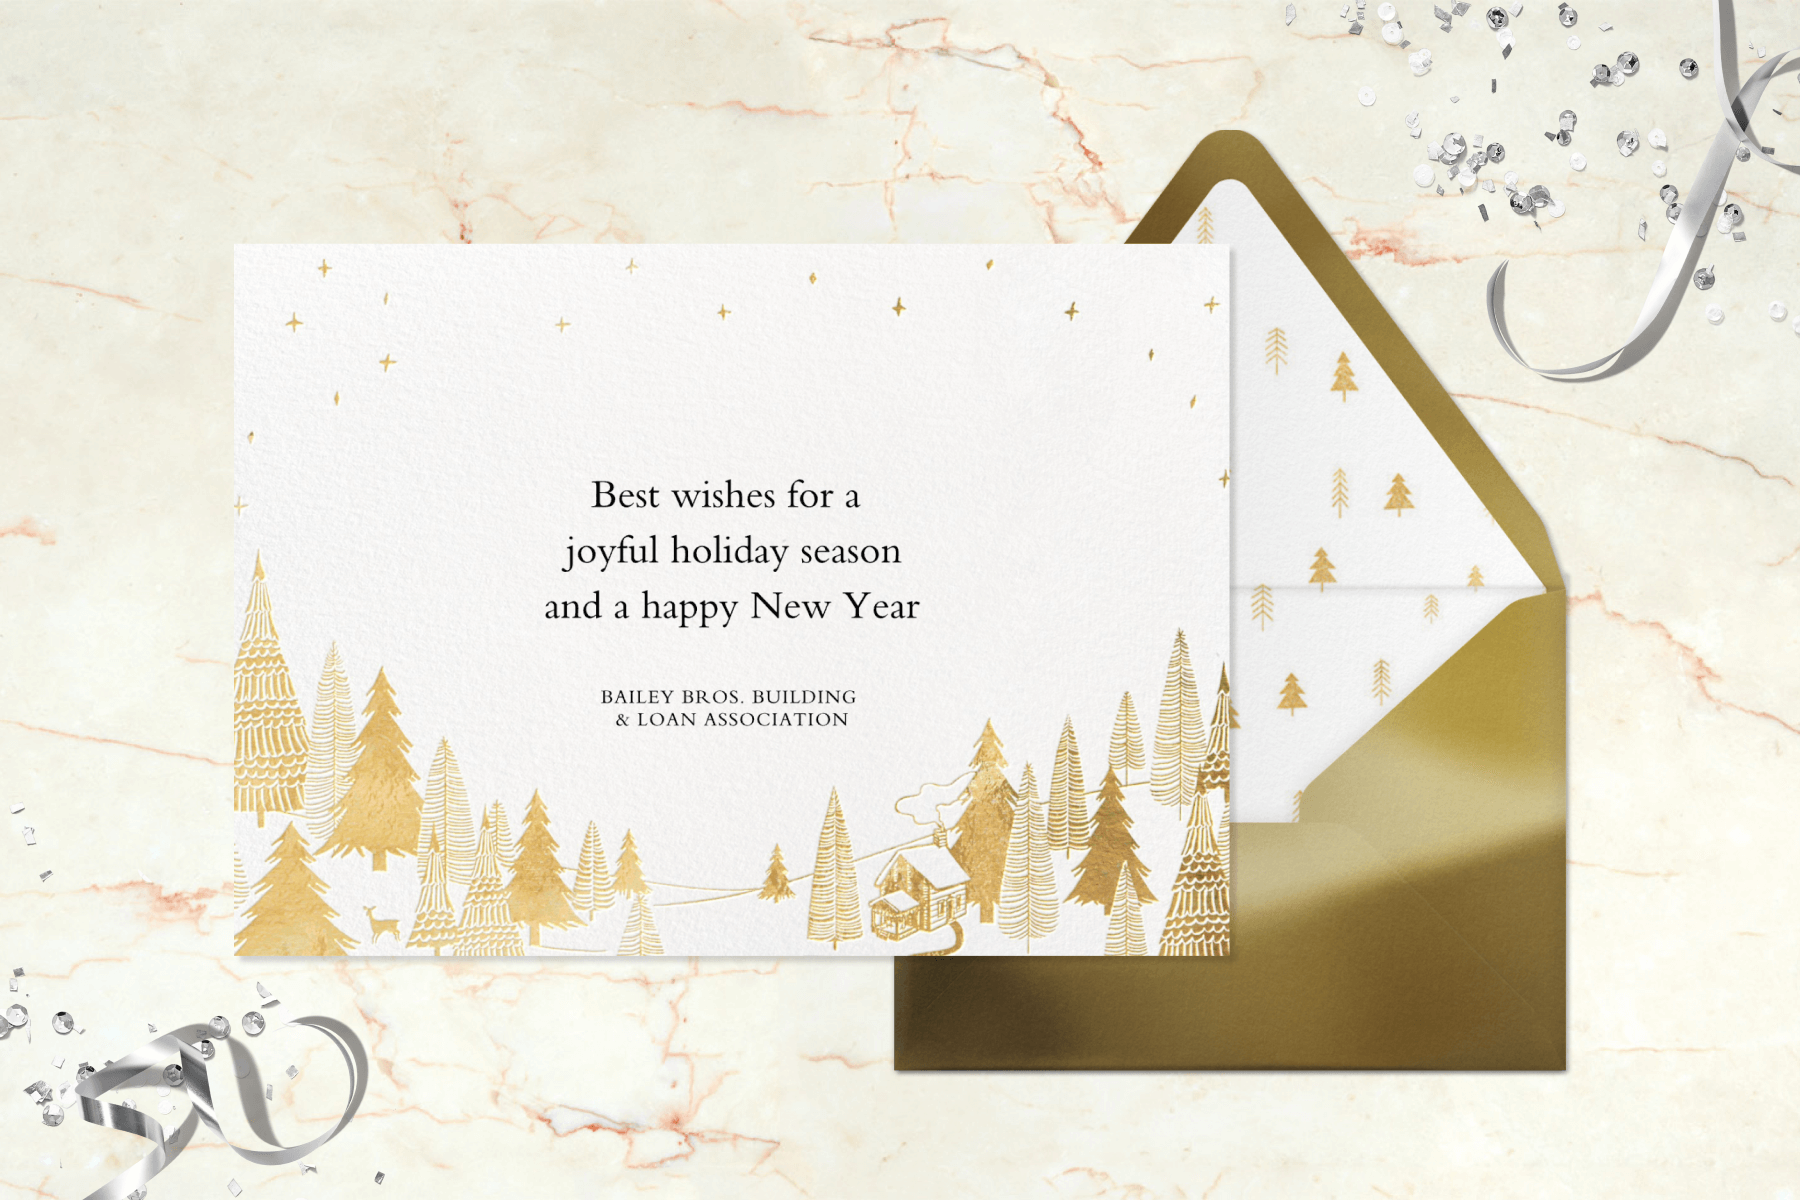 A white holiday card has gold evergreen trees, a cabin, and deer along the bottom with a gold envelope.